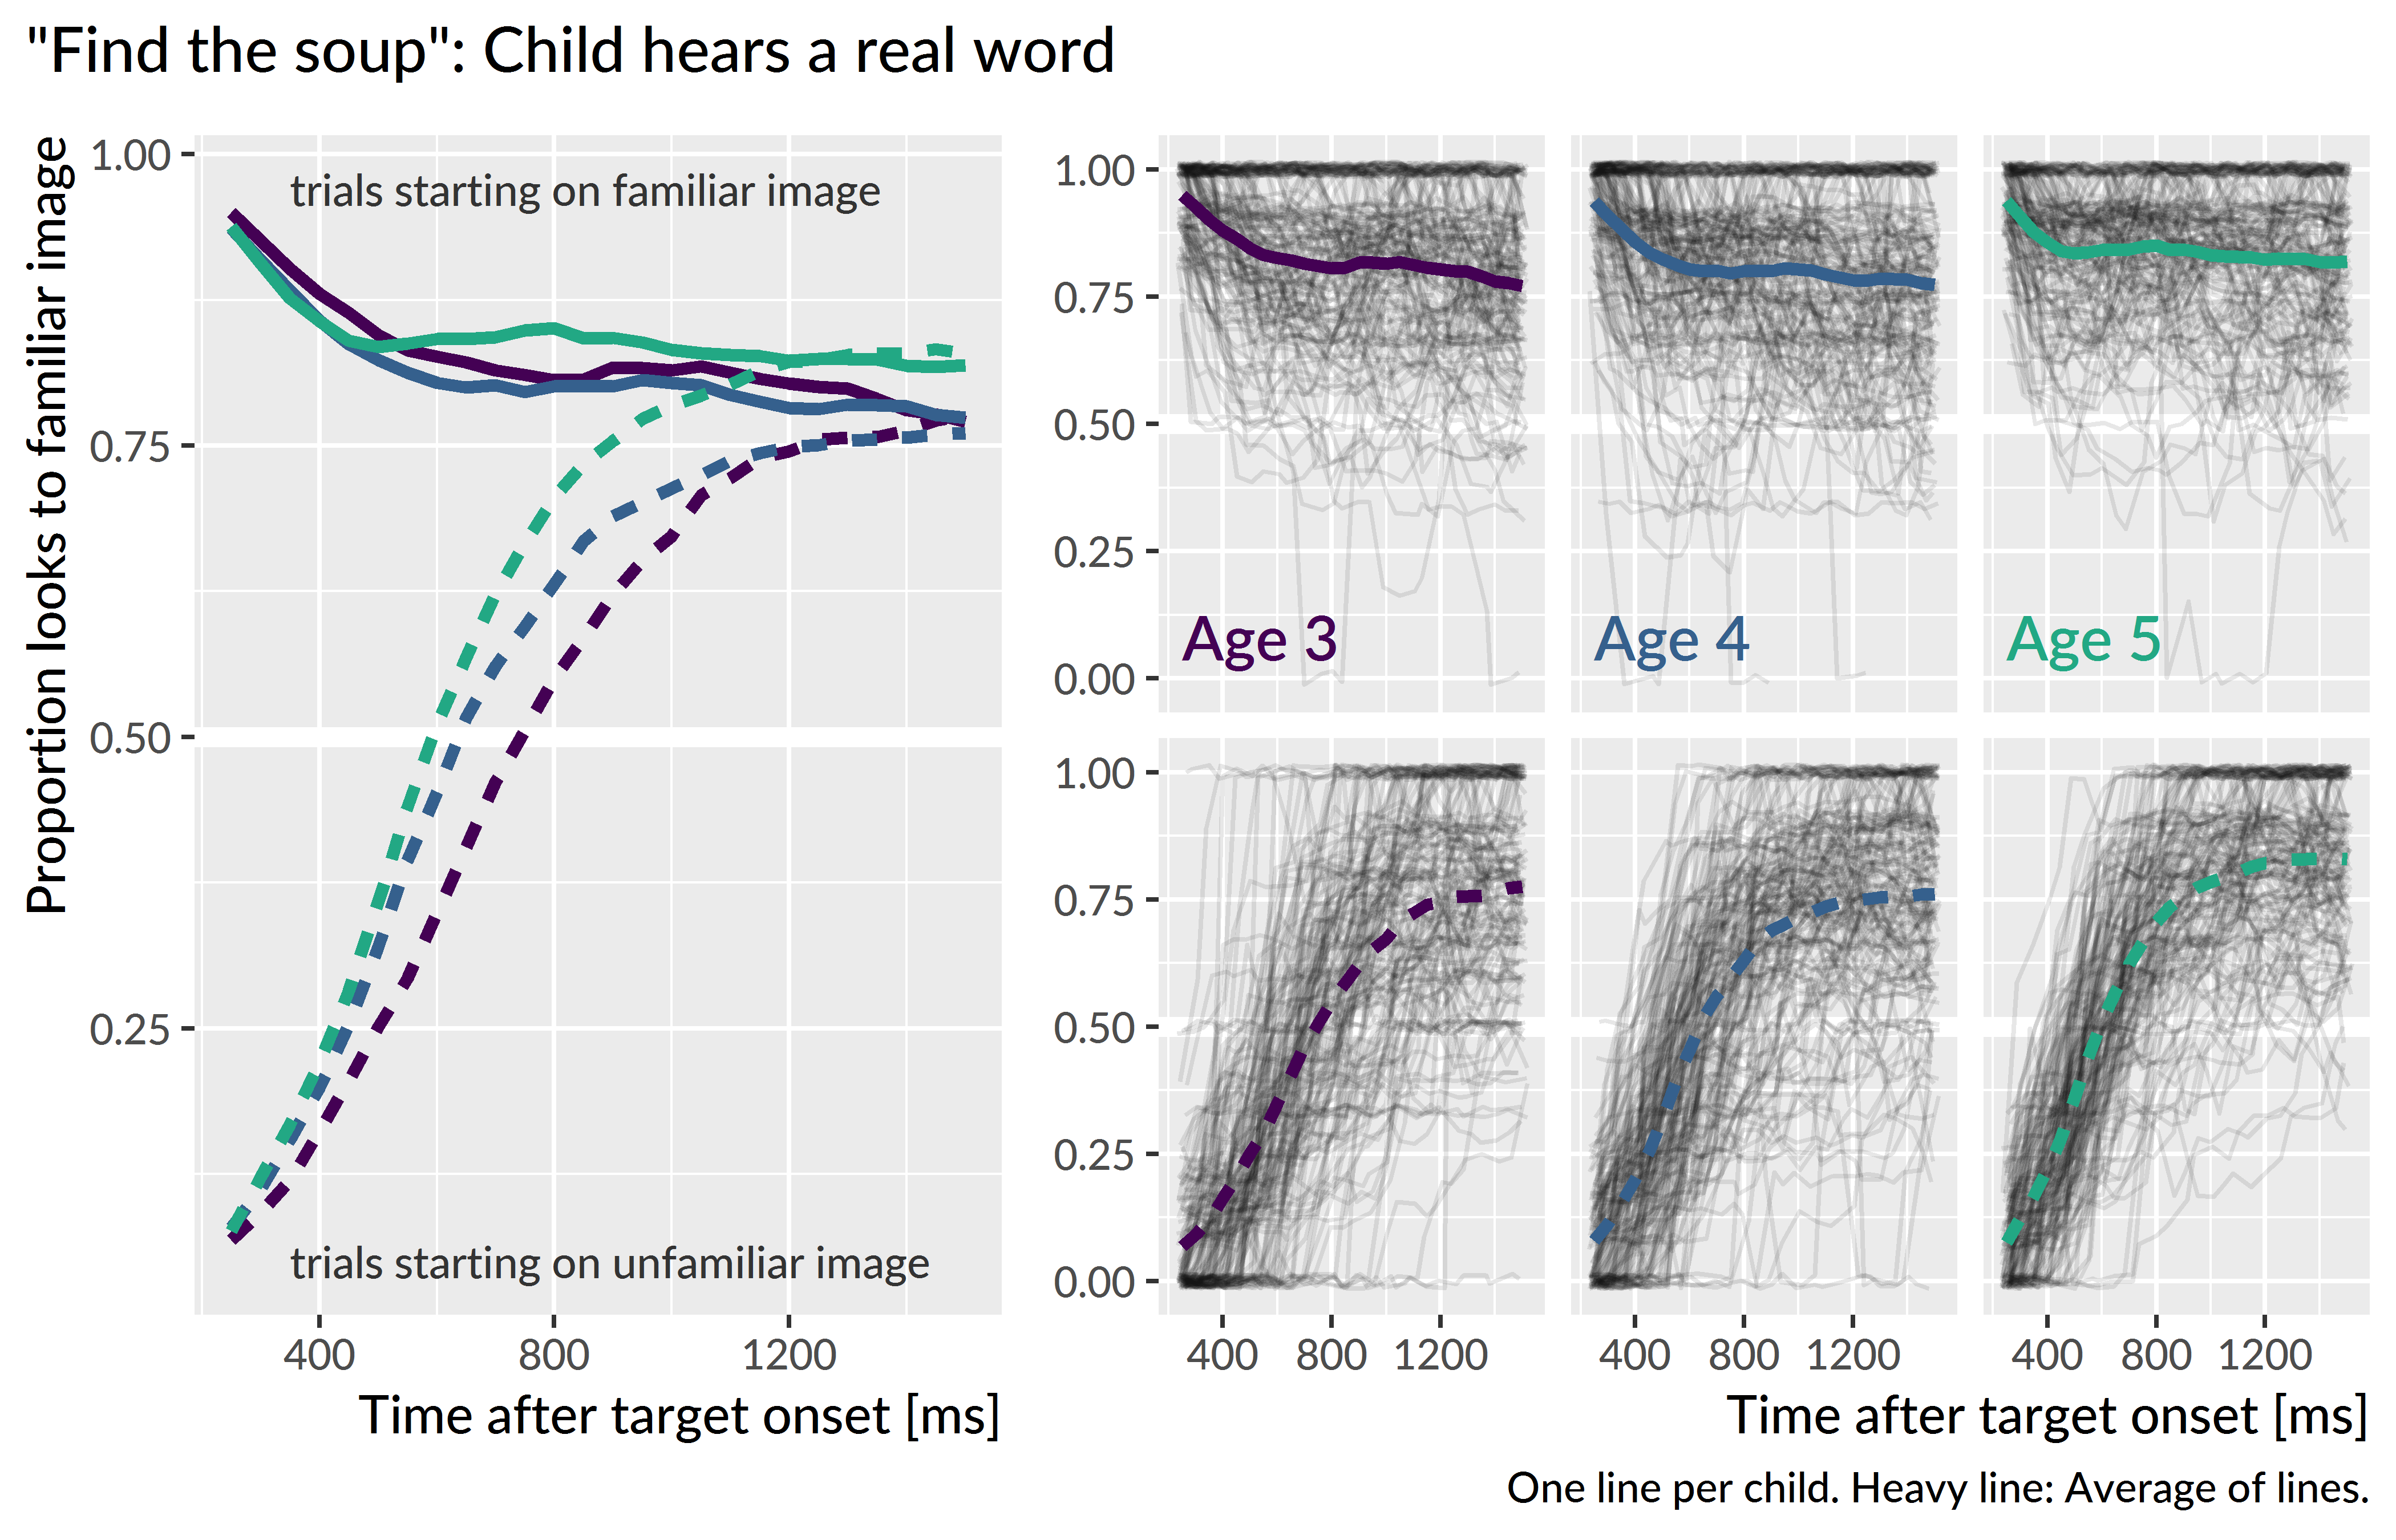 Empirical word recognition growth curves for the real words. Each line represents an individual child’s proportion of looks to the target image over time. The heavy lines are the averages of the lines for each year. Only the steep, upward growth curves from unfamiliar-initial trials are analyzed.